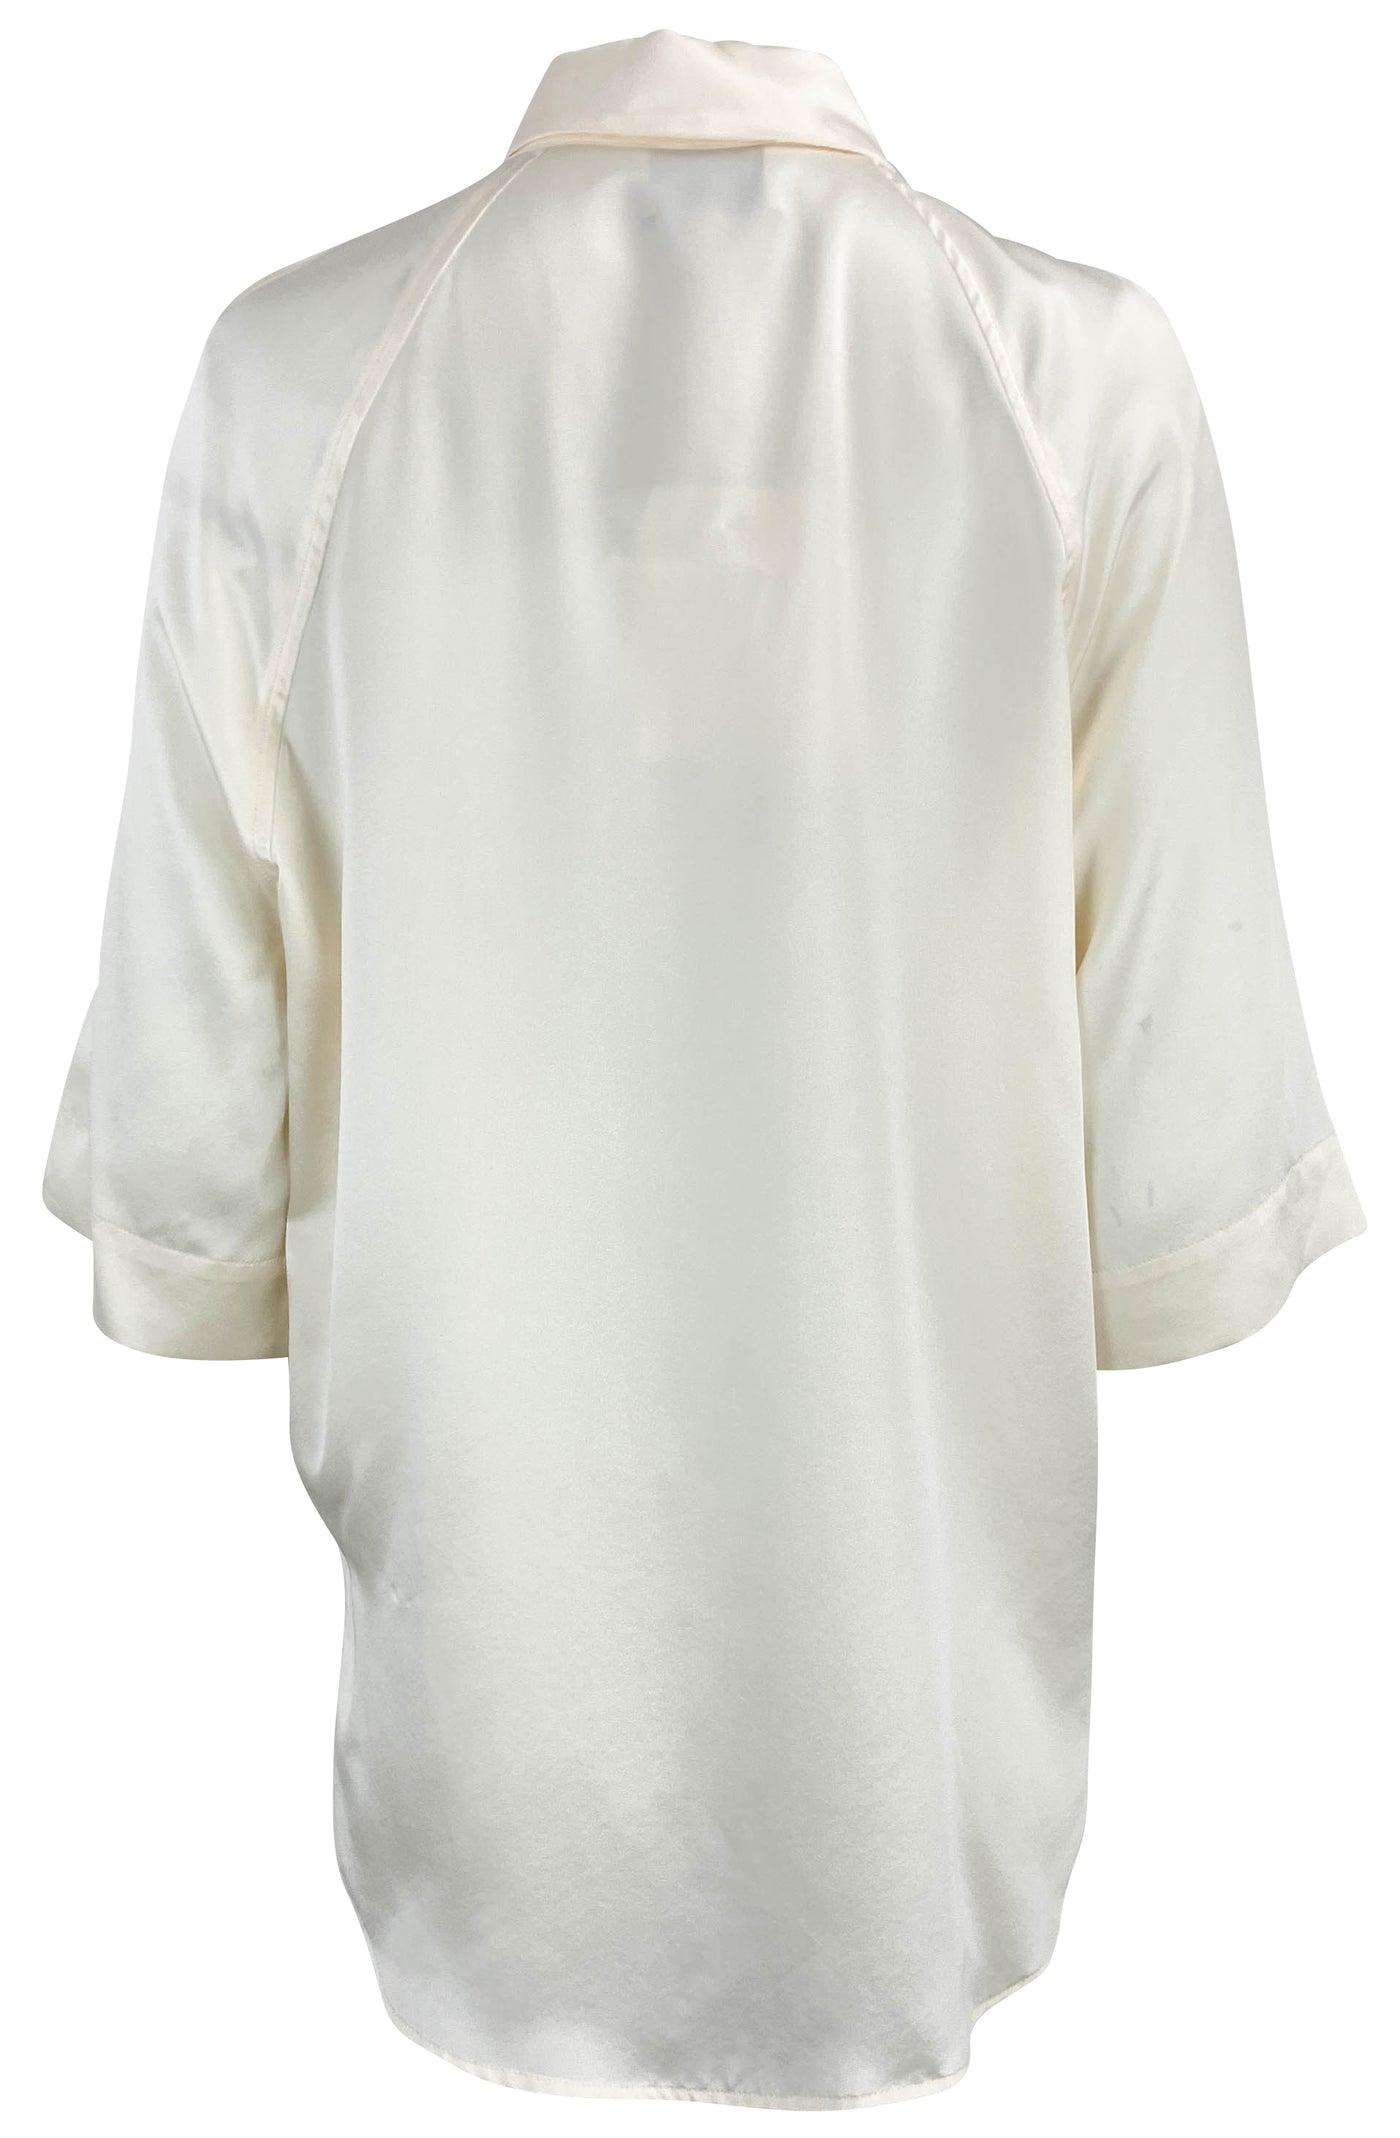 LouLou Studio Silk Button Down in Cream - Discounts on LouLou Studio at UAL